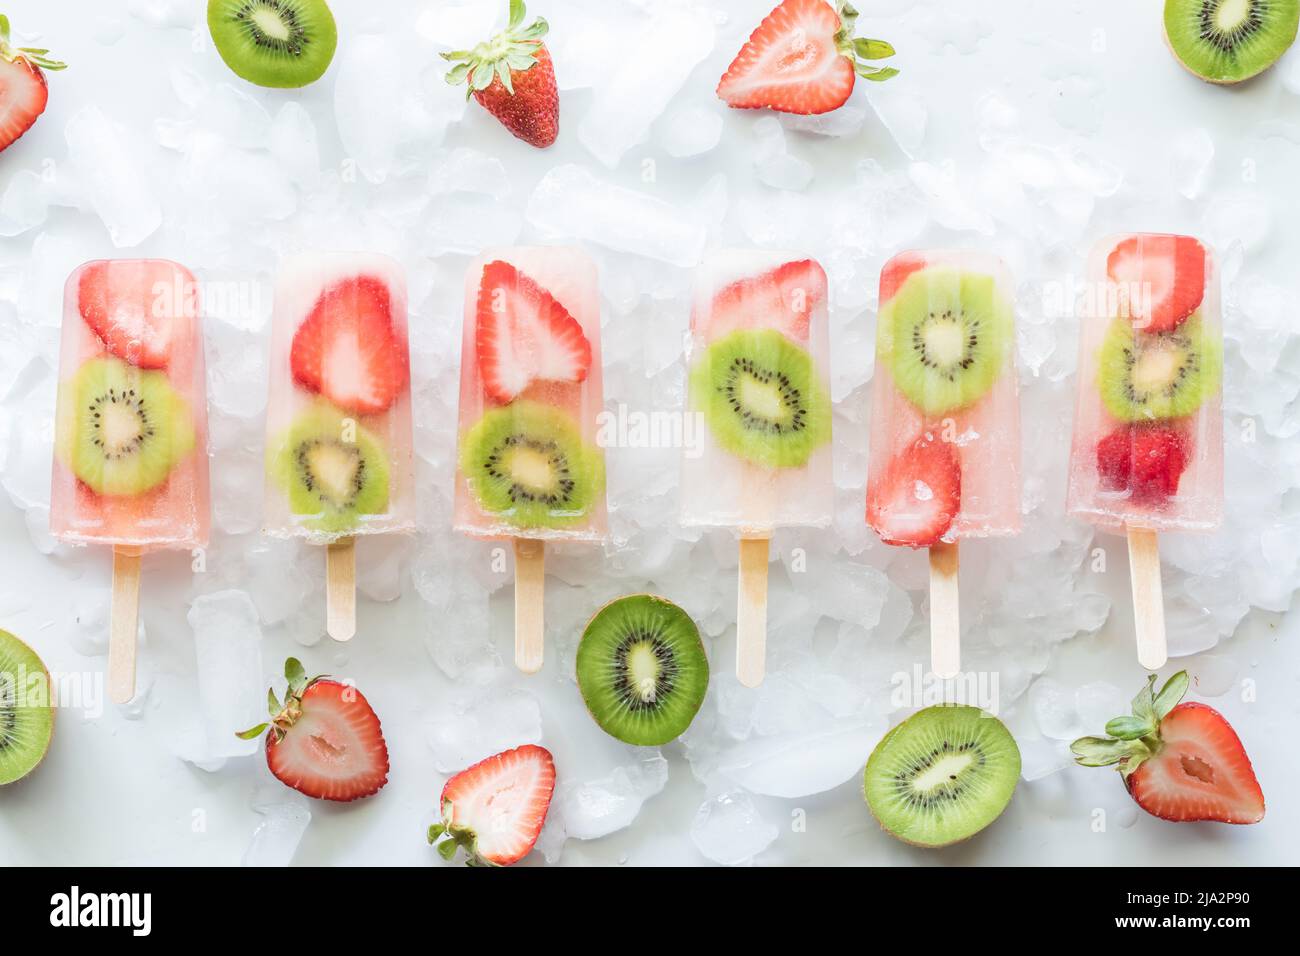 Strawberry kiwi popsicles on ice surrounded by slices of strawberries and kiwi. Stock Photo